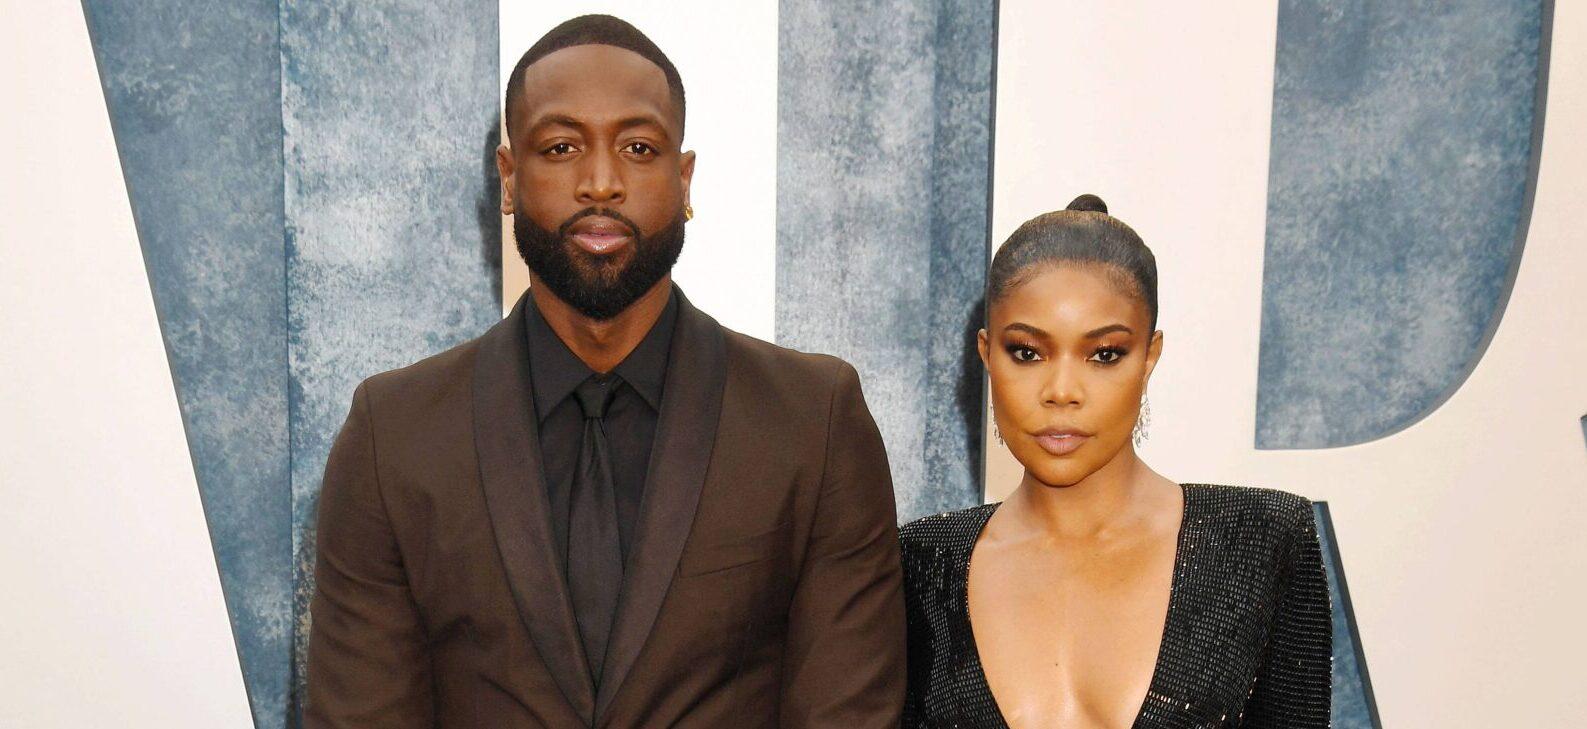 Gabrielle Union Reveals She And Partner Dwyane Wade Split Everything 50/50 In Their Household